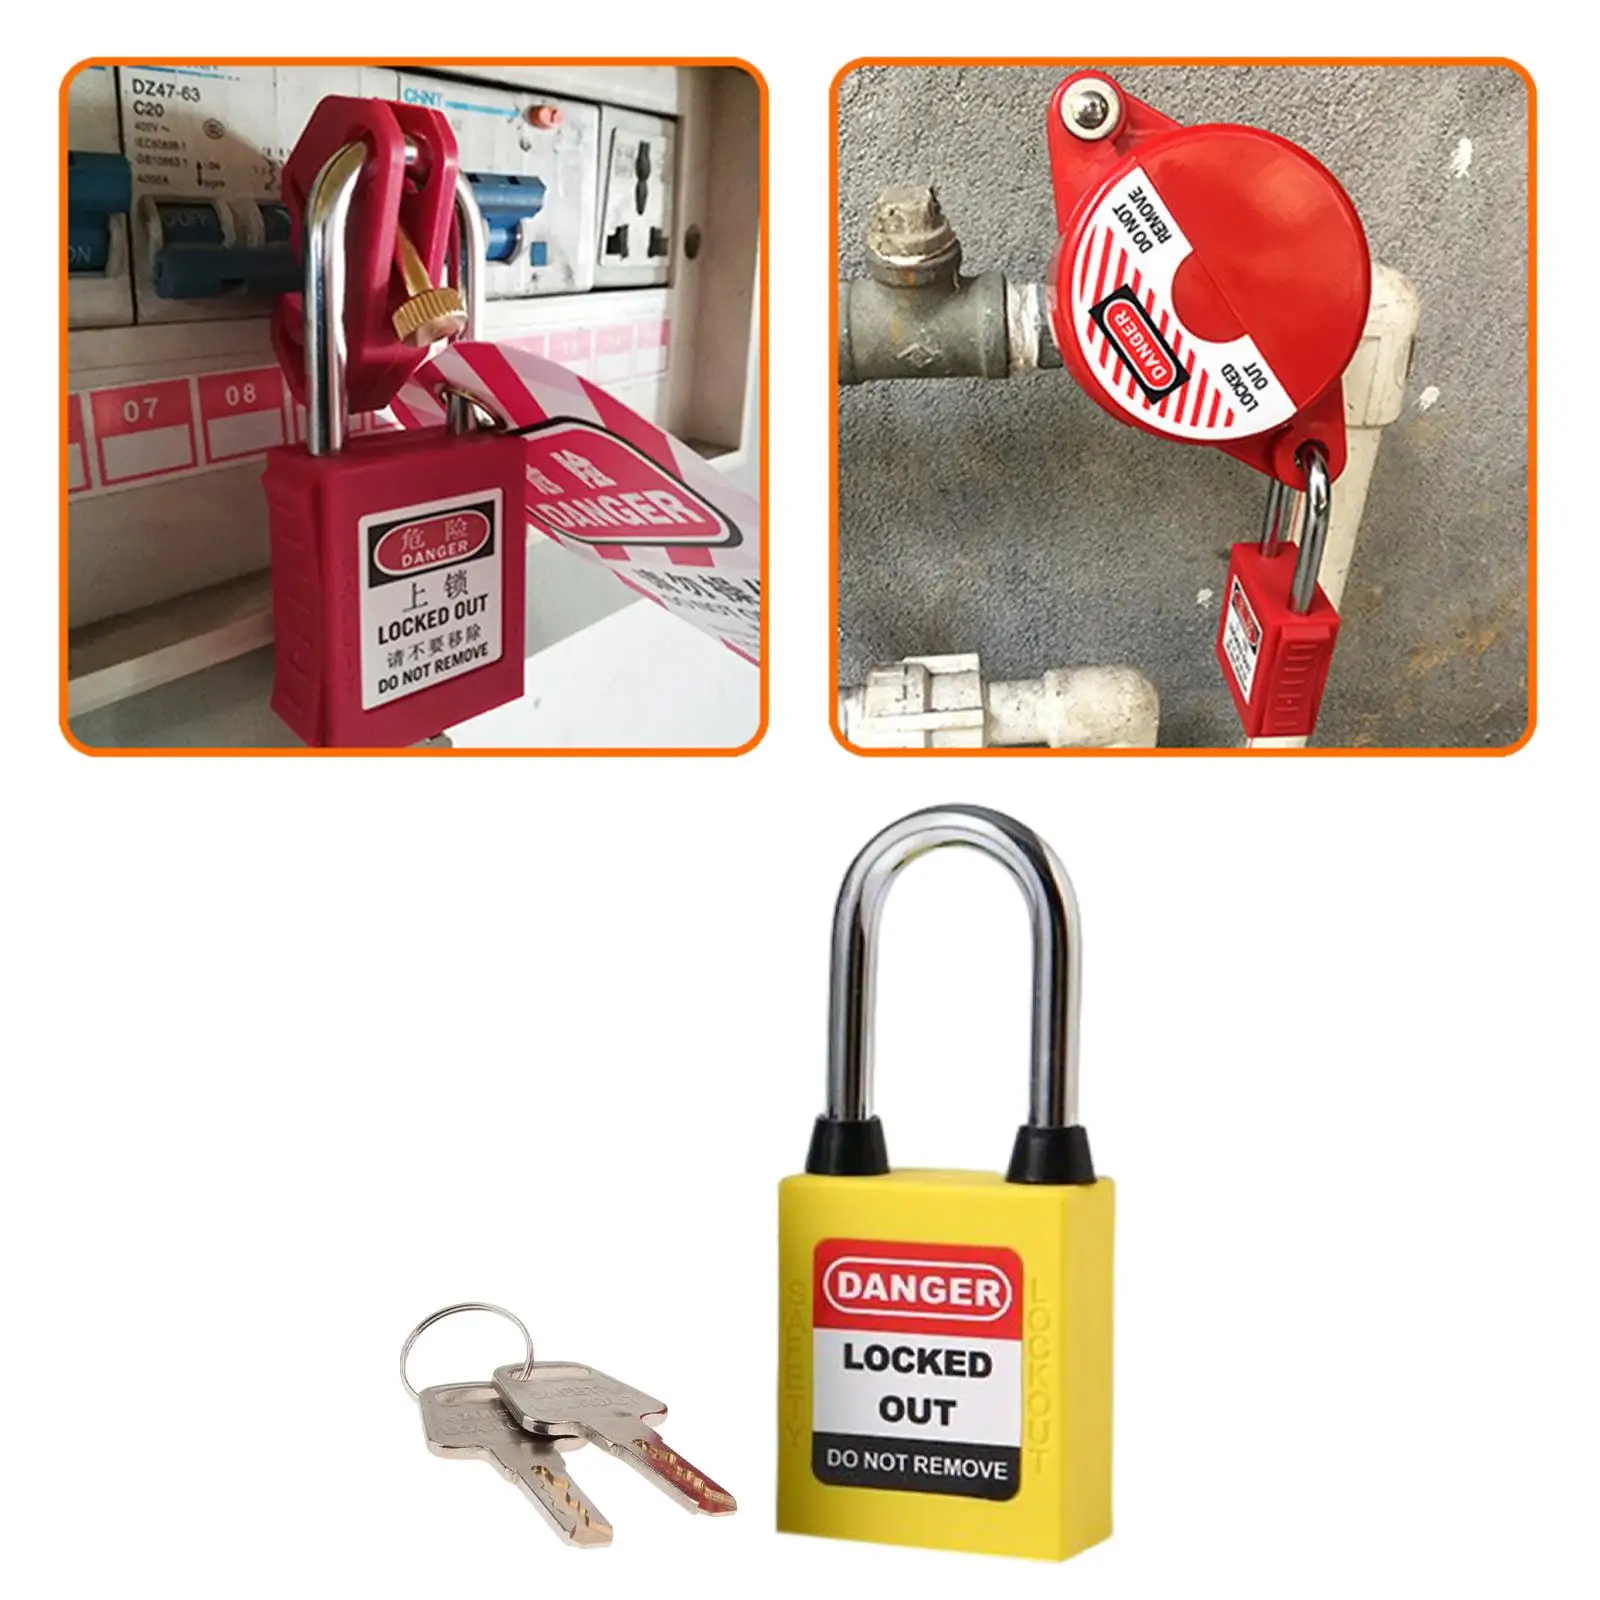 Lockout Tagout Locks Lock Out Tag Out Steel Shackle 1.5inch Shackle Compact